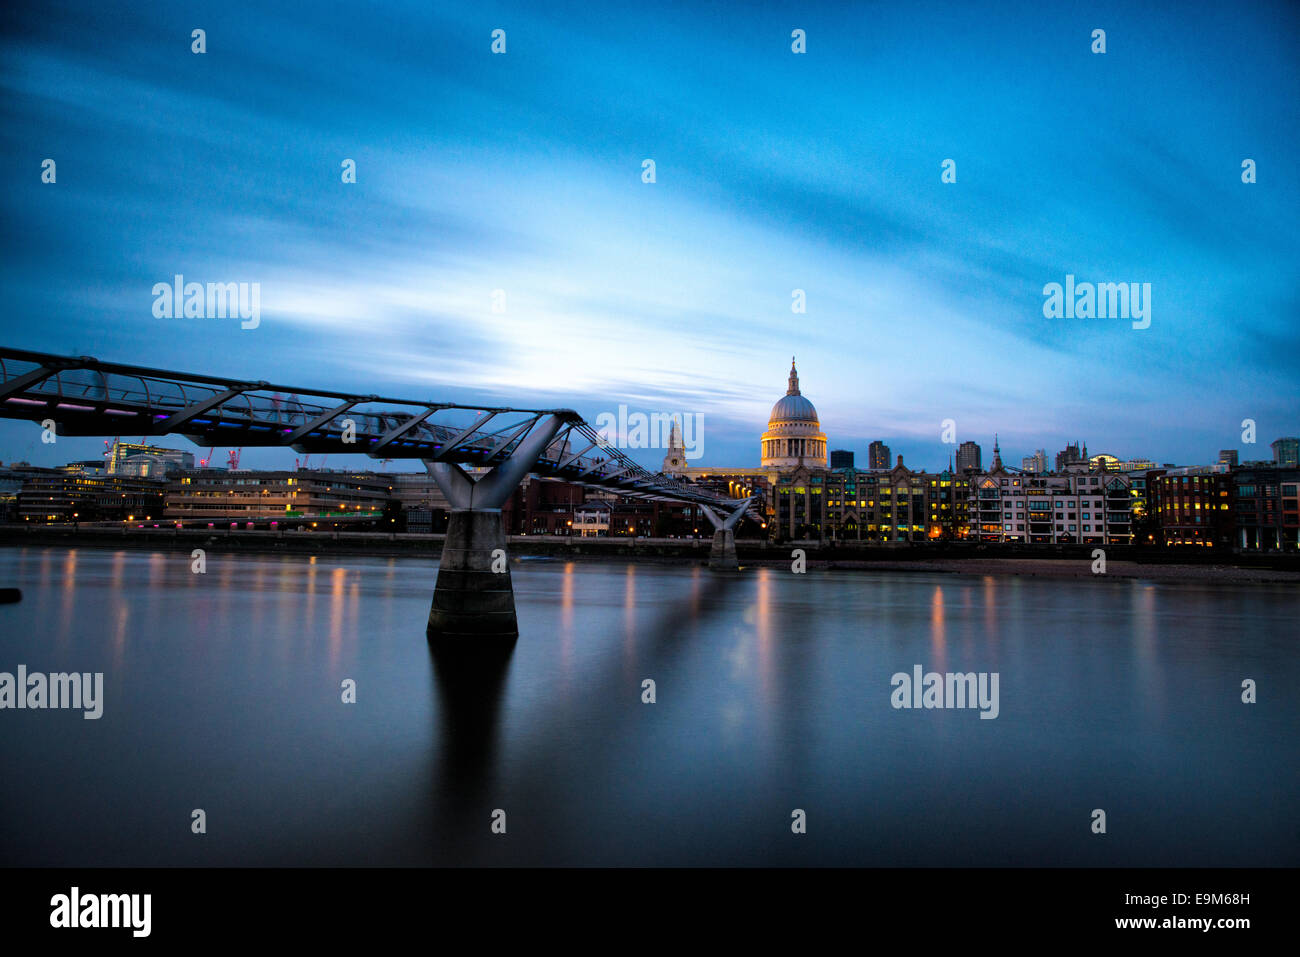 LONDON, UK - The Thames, with the Millennial Bridge and the dome of St Paul's Cathedral in London at dusk. London, United Kingdom. Stock Photo